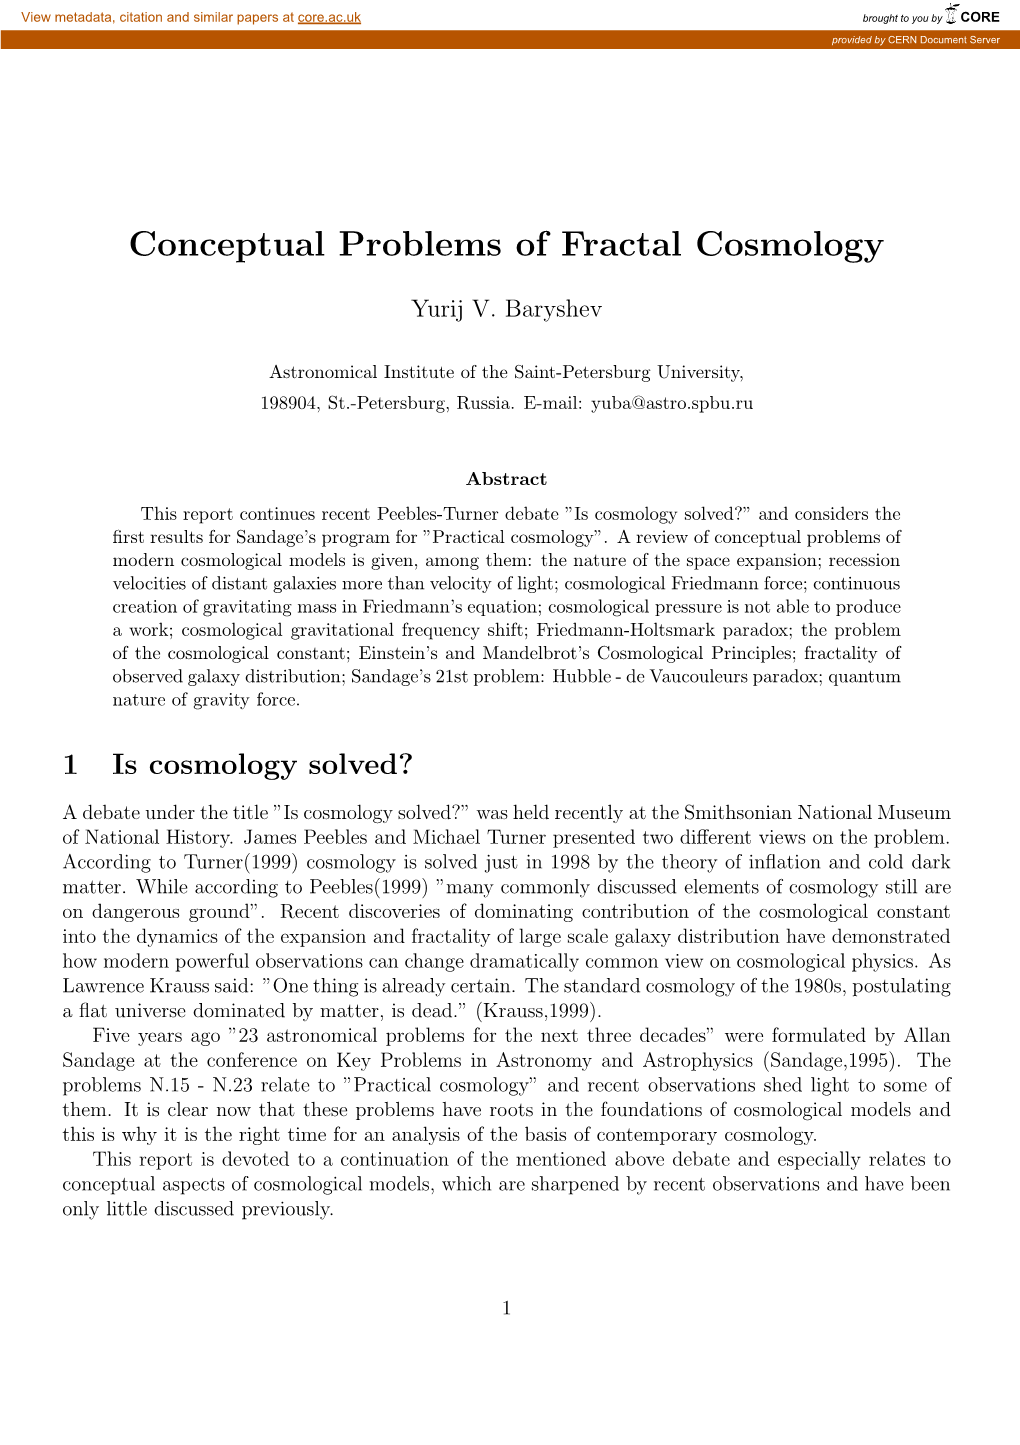 Conceptual Problems of Fractal Cosmology